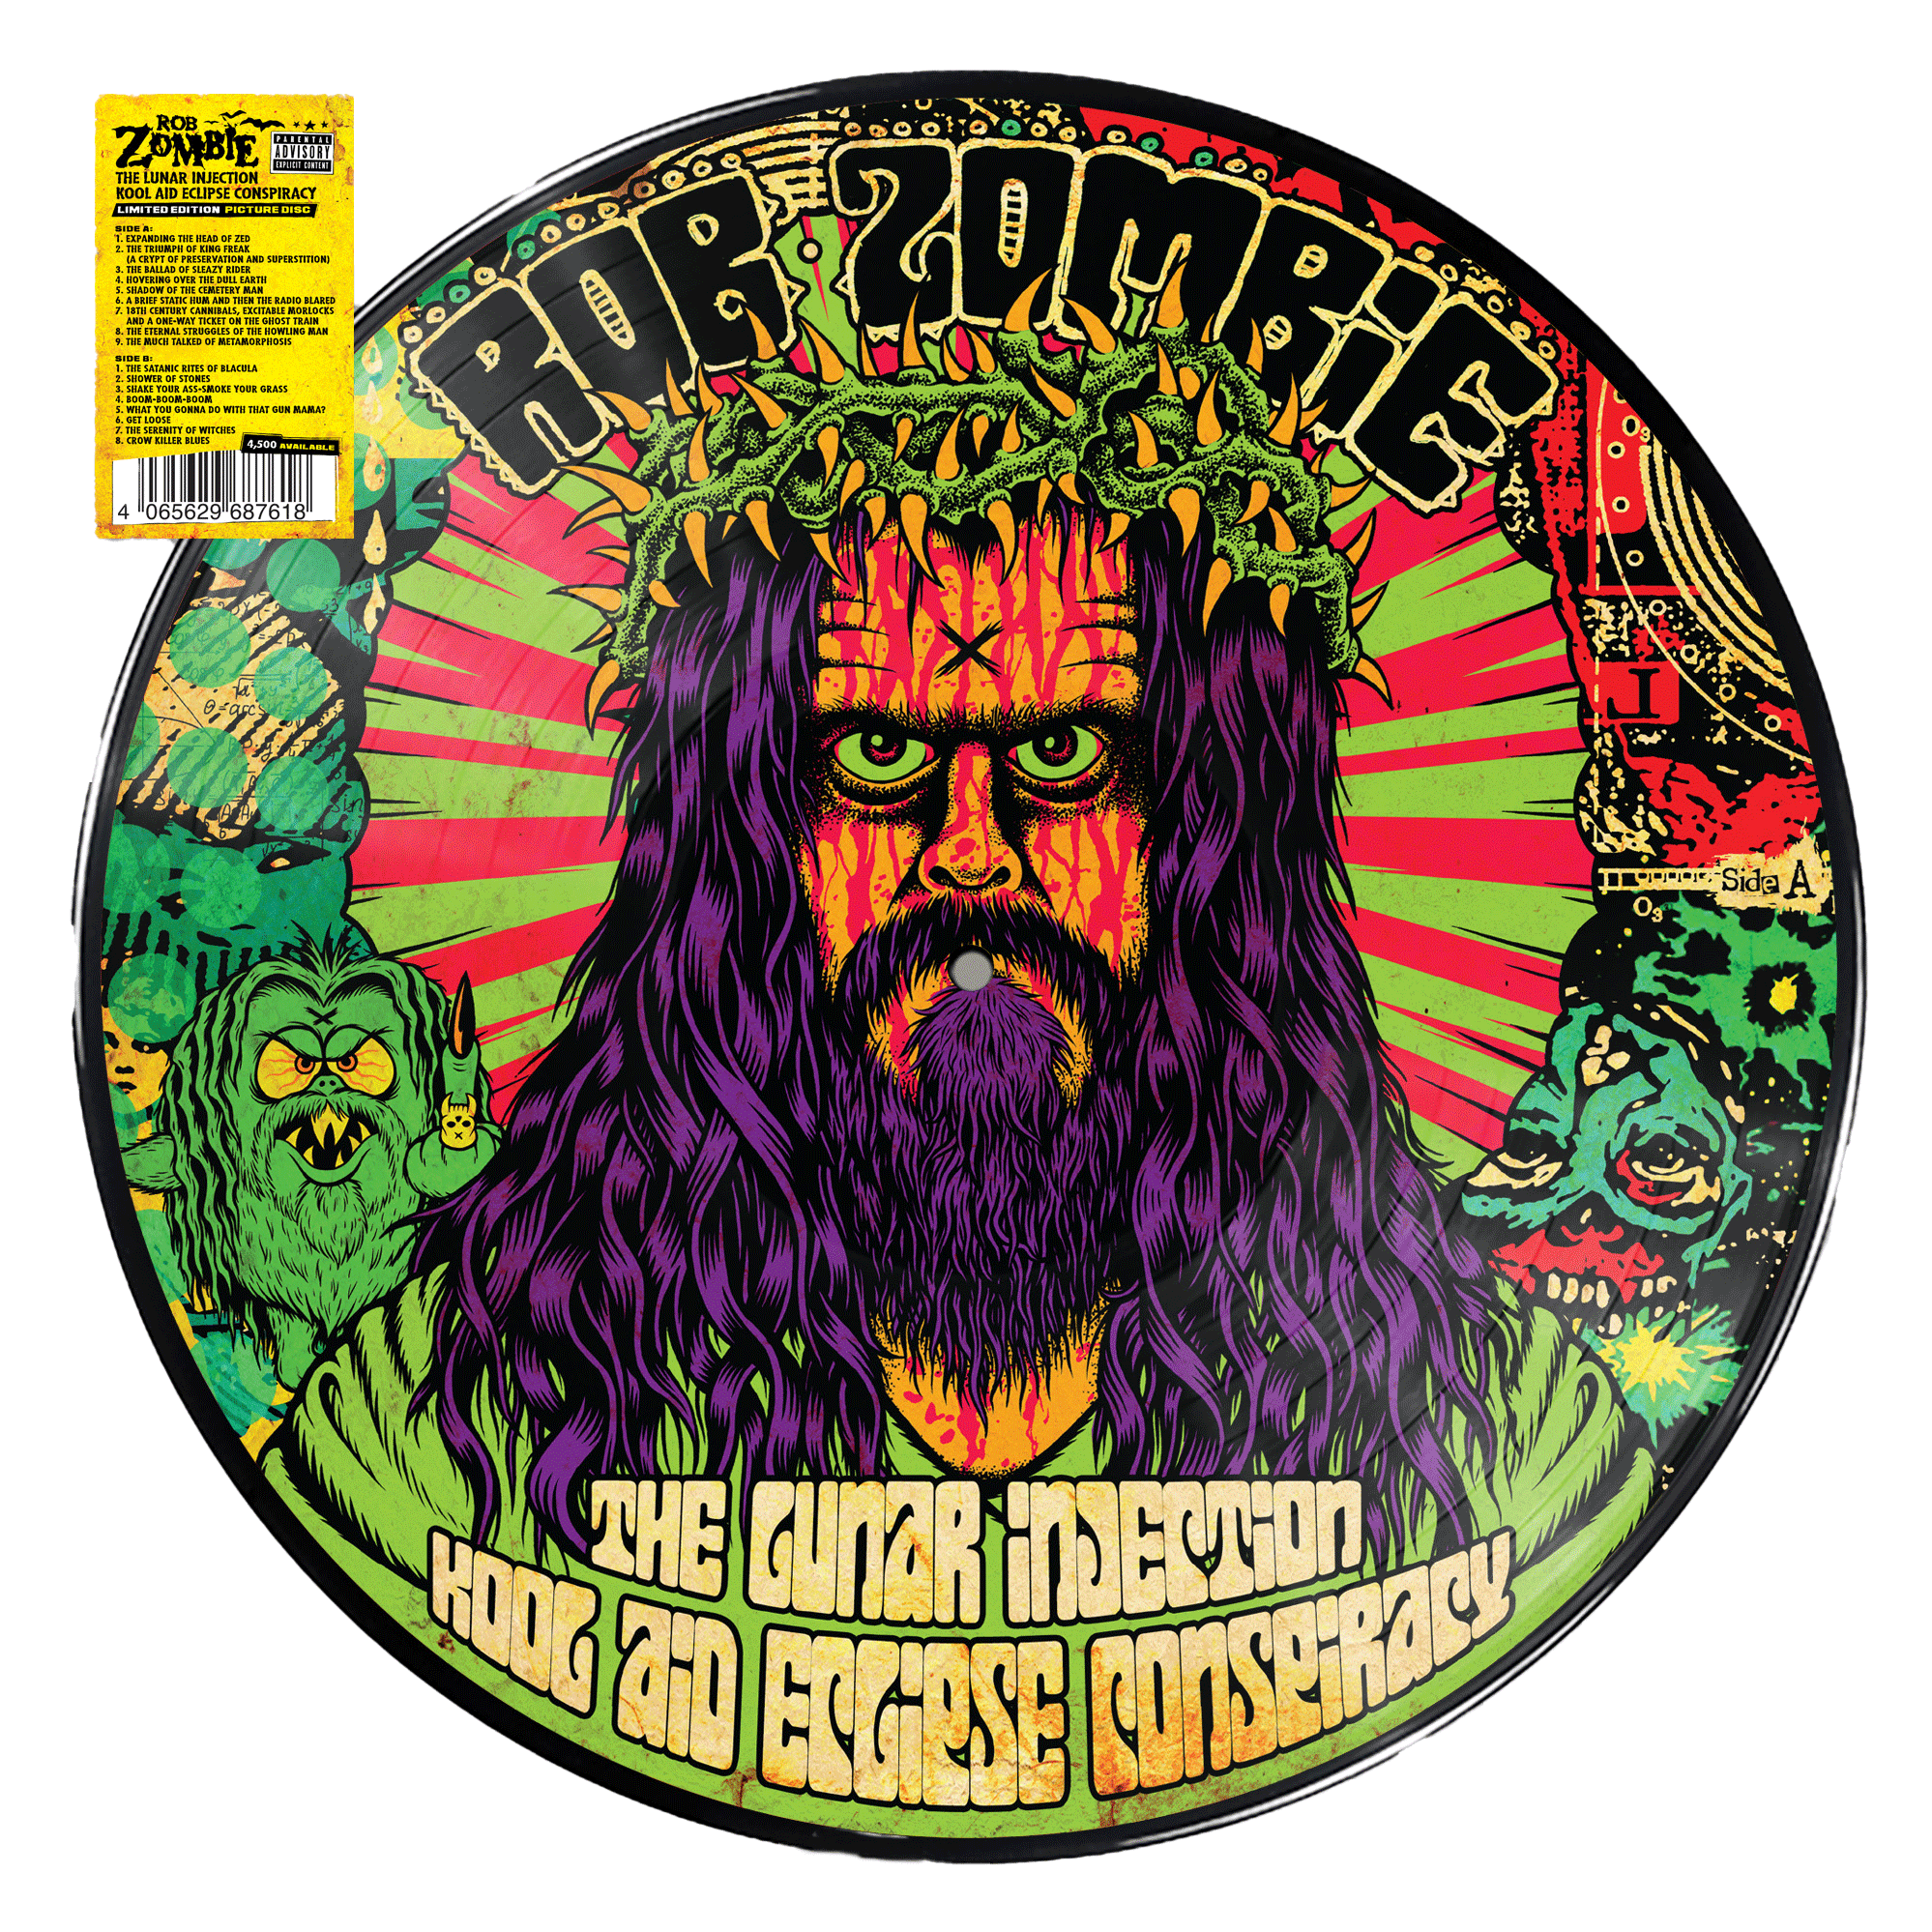 Rob Zombie - Lunar Injection Kool Aid Eclipse Conspiracy (Picture Disc)(RSD Blac